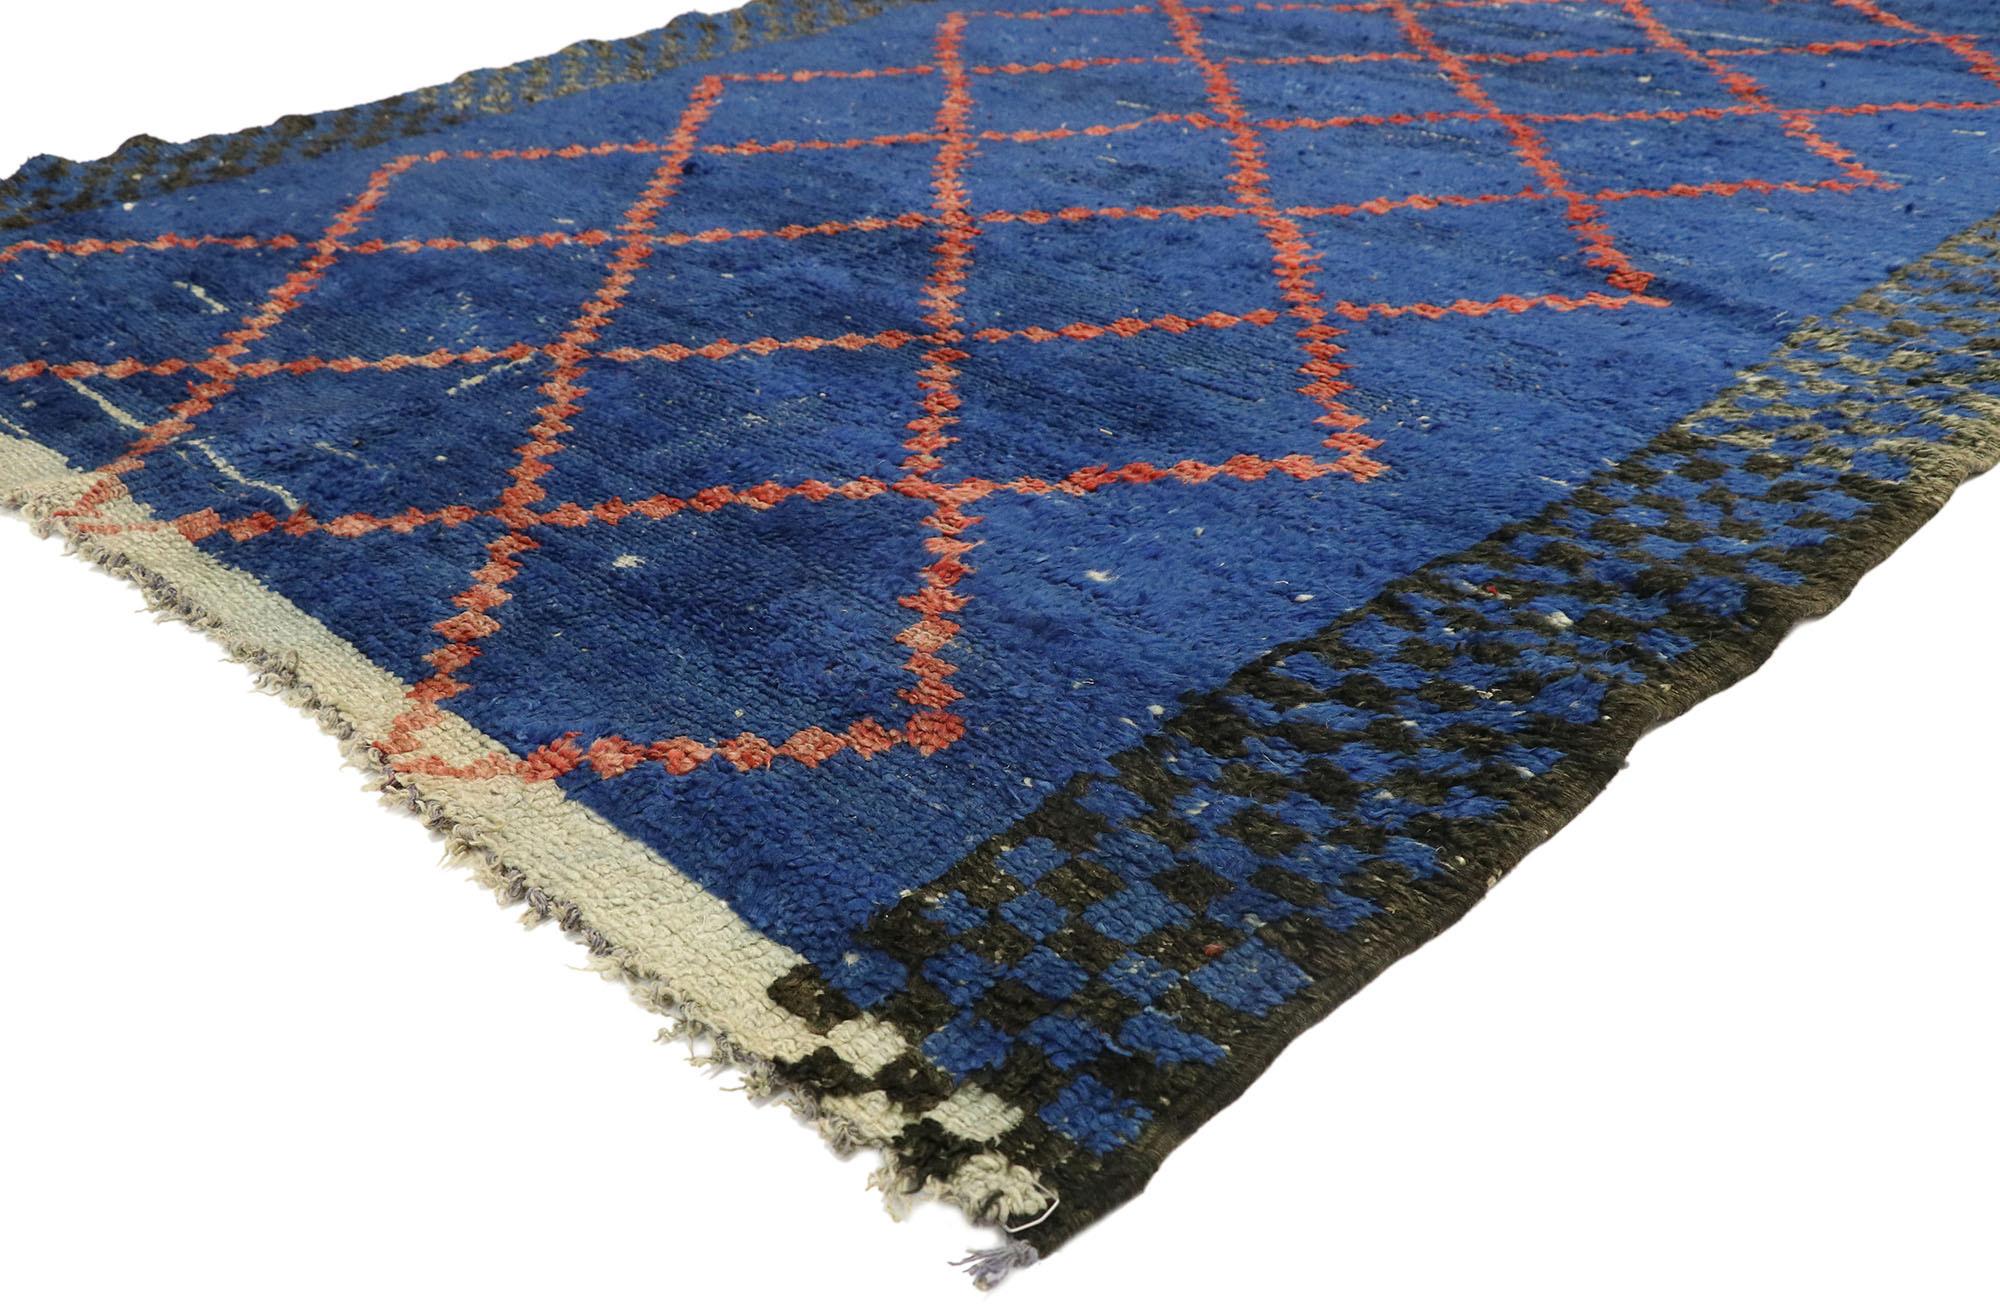 21056 Weathered Vintage Berber Blue Moroccan Rug, 05'11 x 08'05. This vintage Moroccan rug, meticulously hand-knotted from wool, boasts a captivating diamond trellis pattern adorning its surface. Across an abrashed and weathered blue backdrop, a